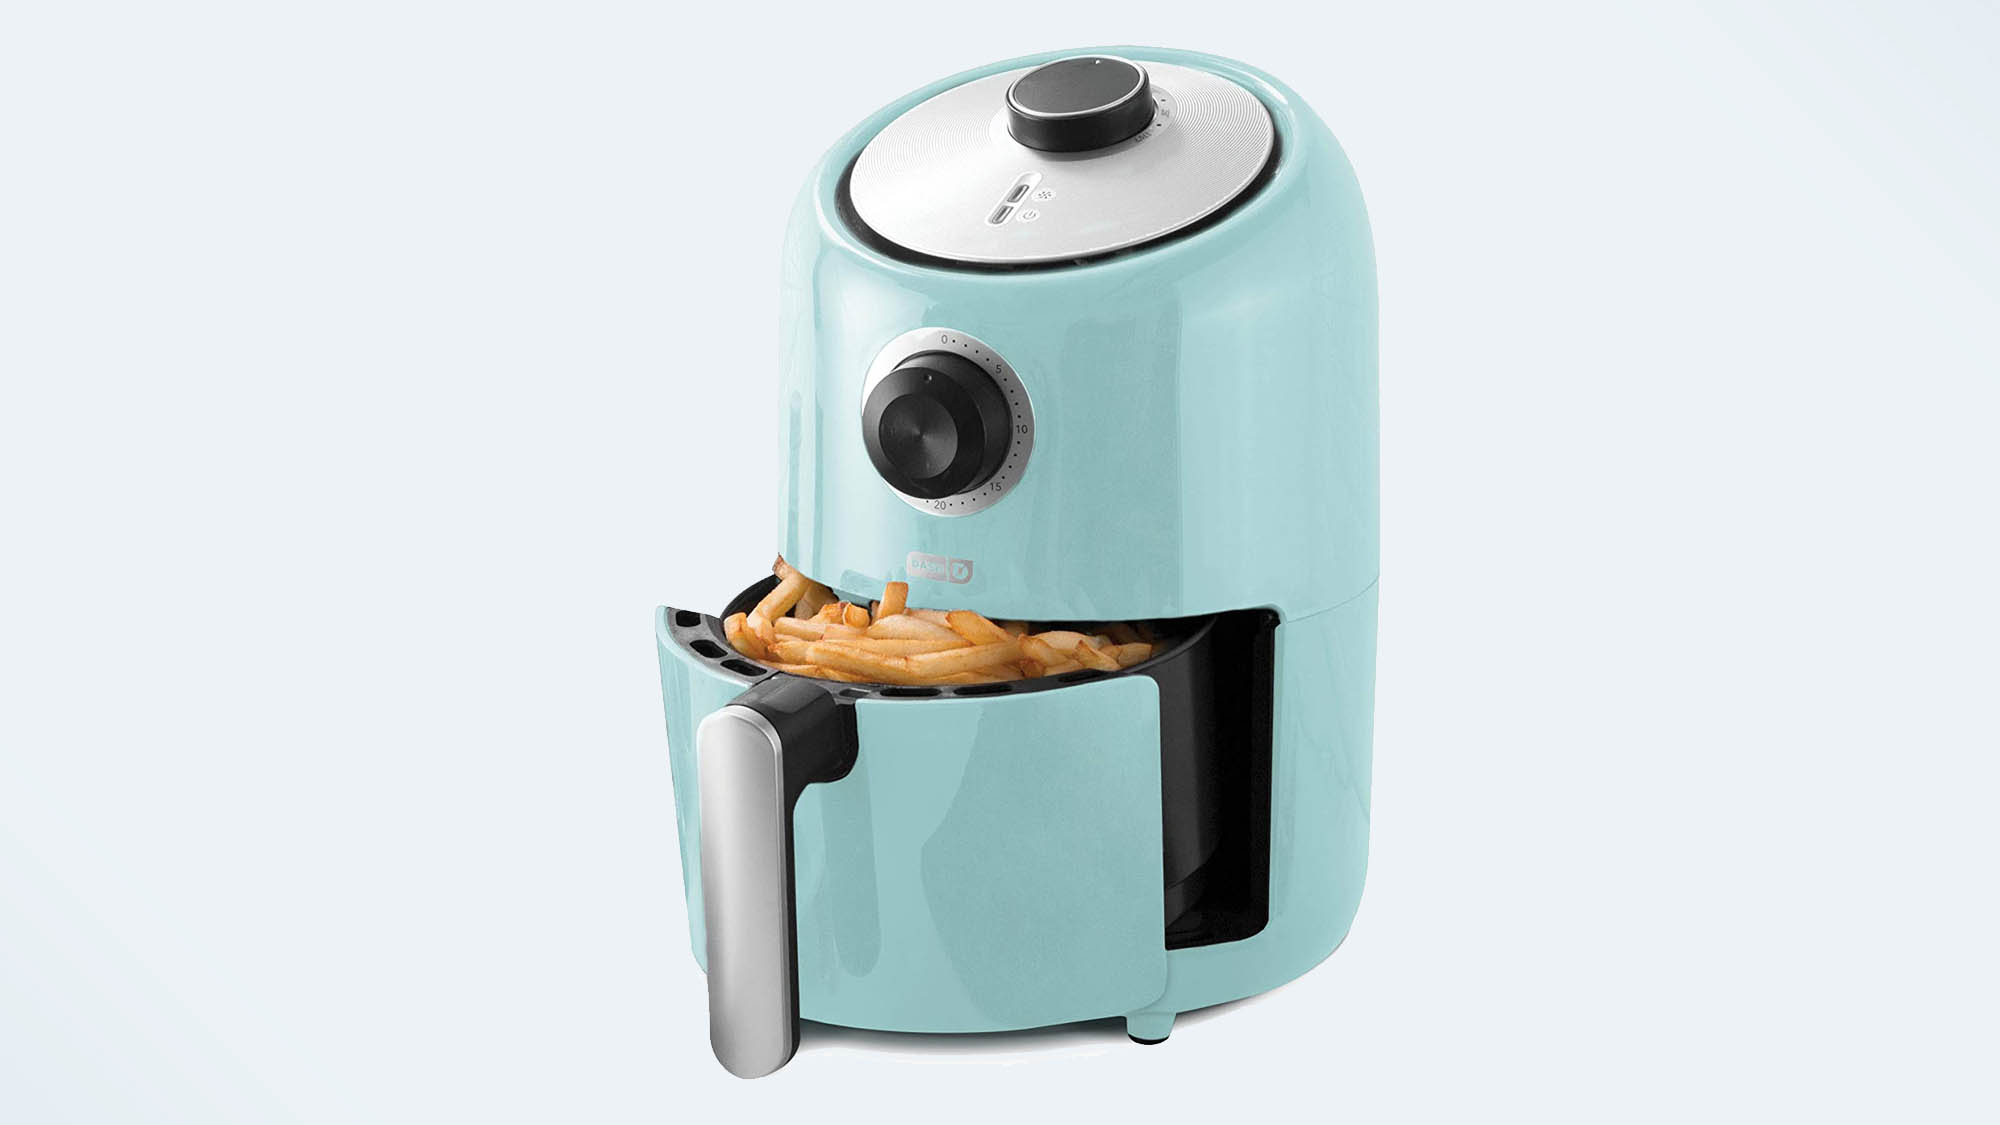 Best Appliance for Student Living: Dash Compact Air Fryer